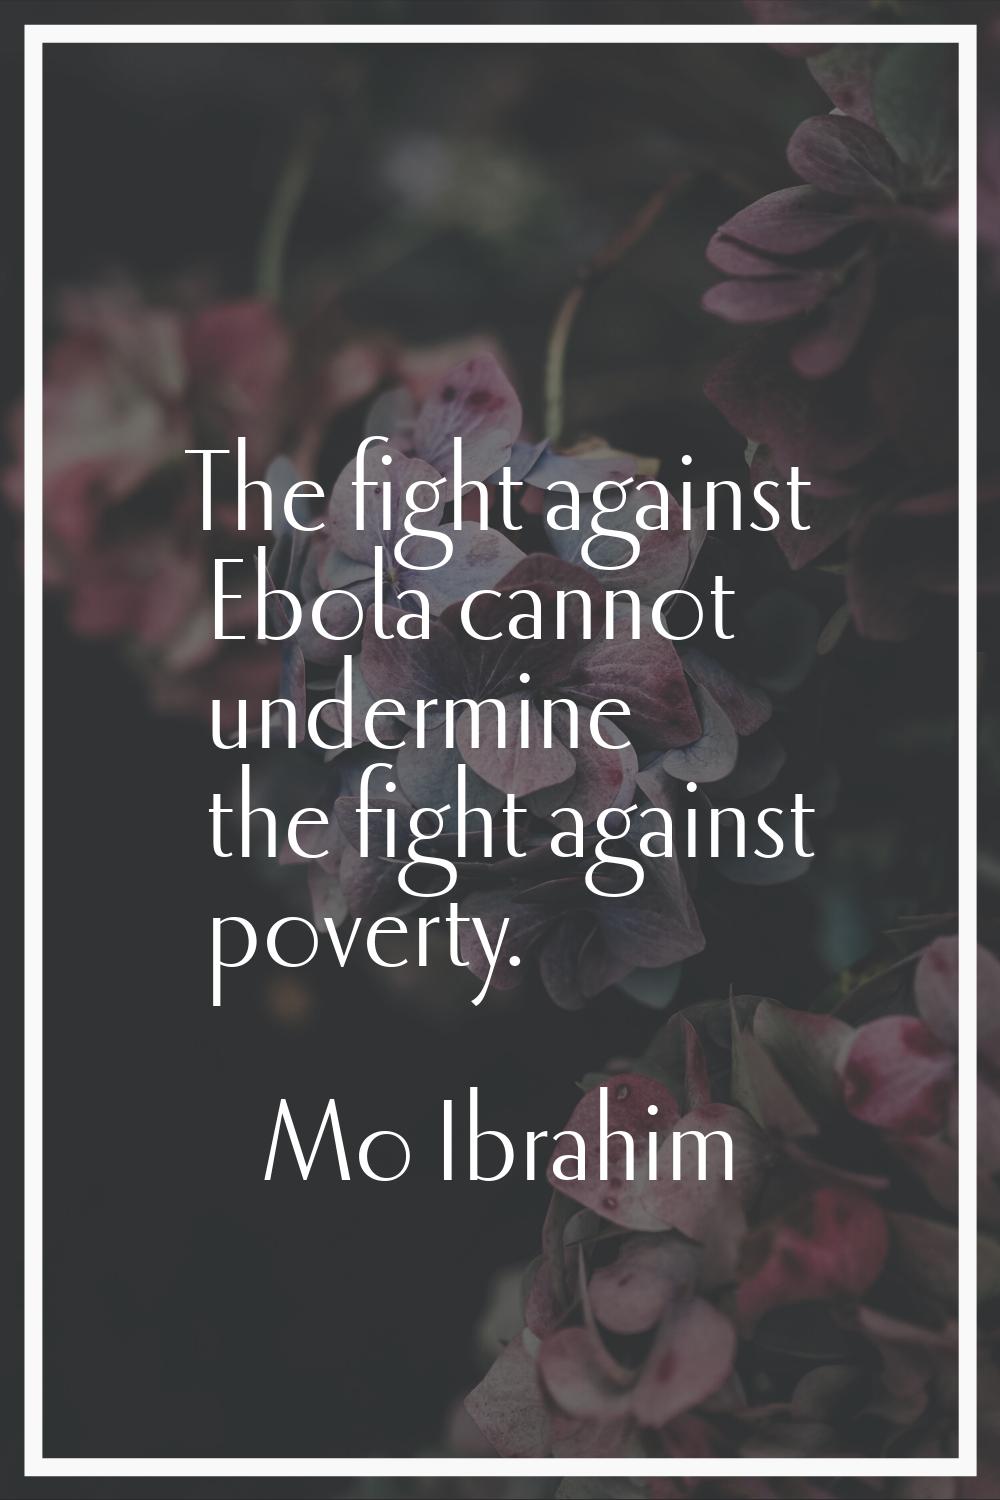 The fight against Ebola cannot undermine the fight against poverty.